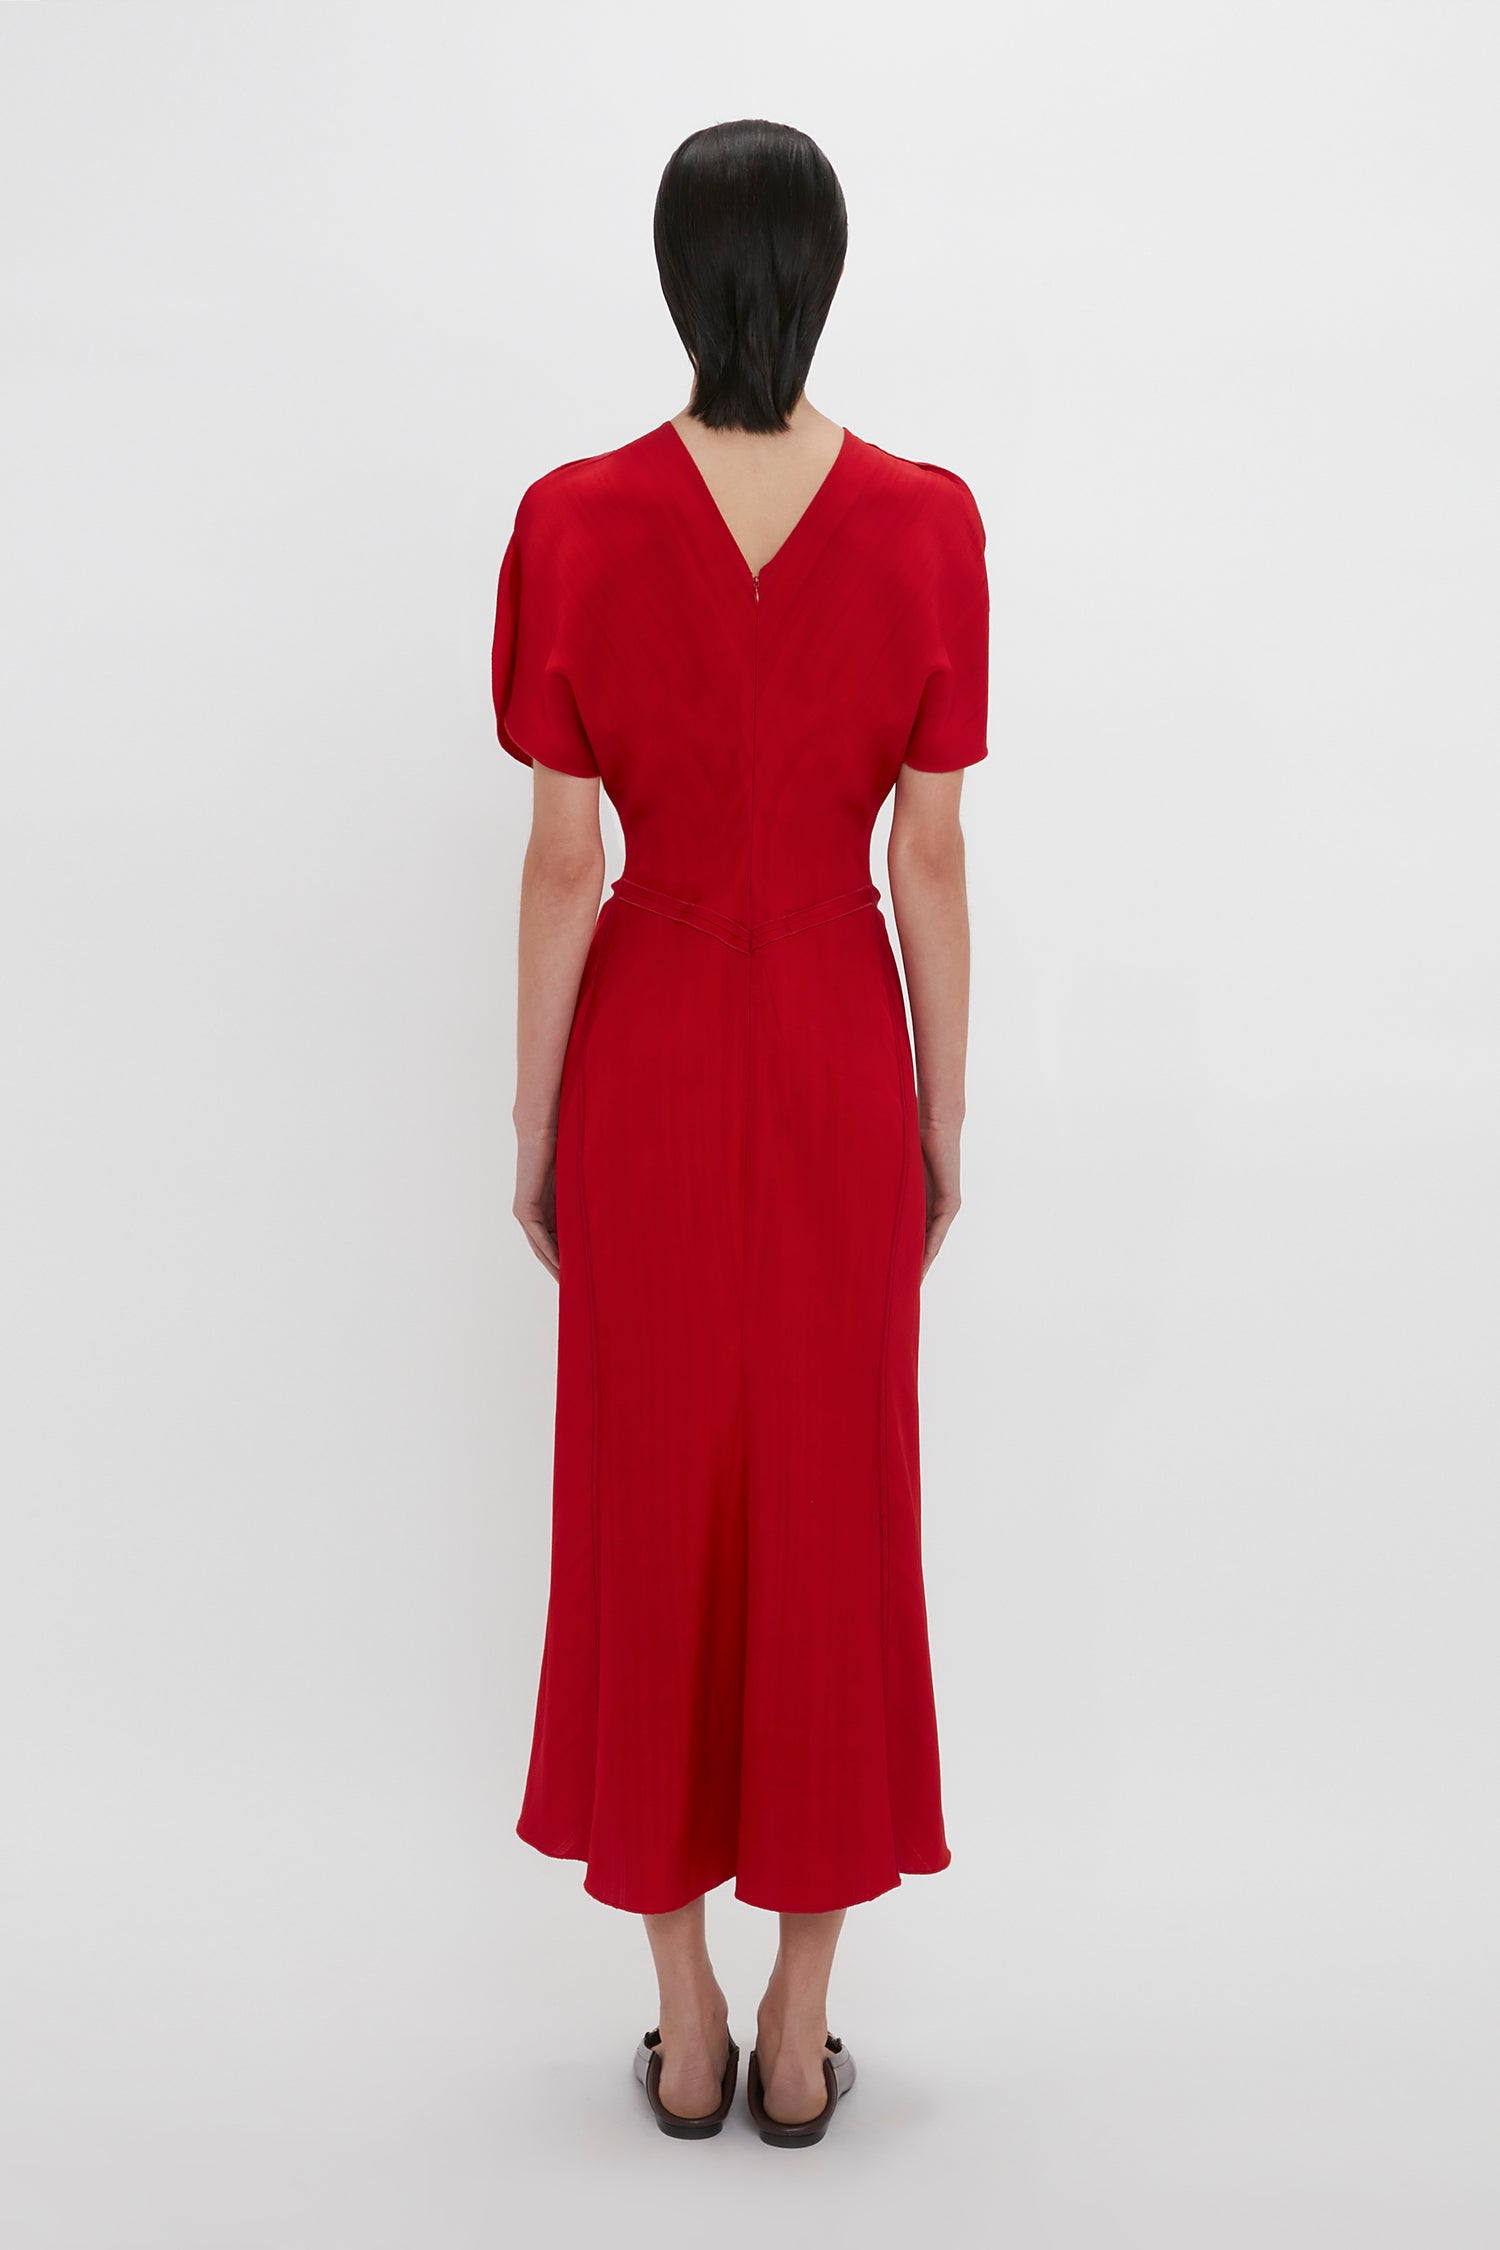 A person with short, dark hair stands with their back to the camera, wearing a red Exclusive Gathered Waist Midi Dress In Carmine by Victoria Beckham, with short sleeves and a V-shaped back—channelling elegant Victoria Beckham vibes.